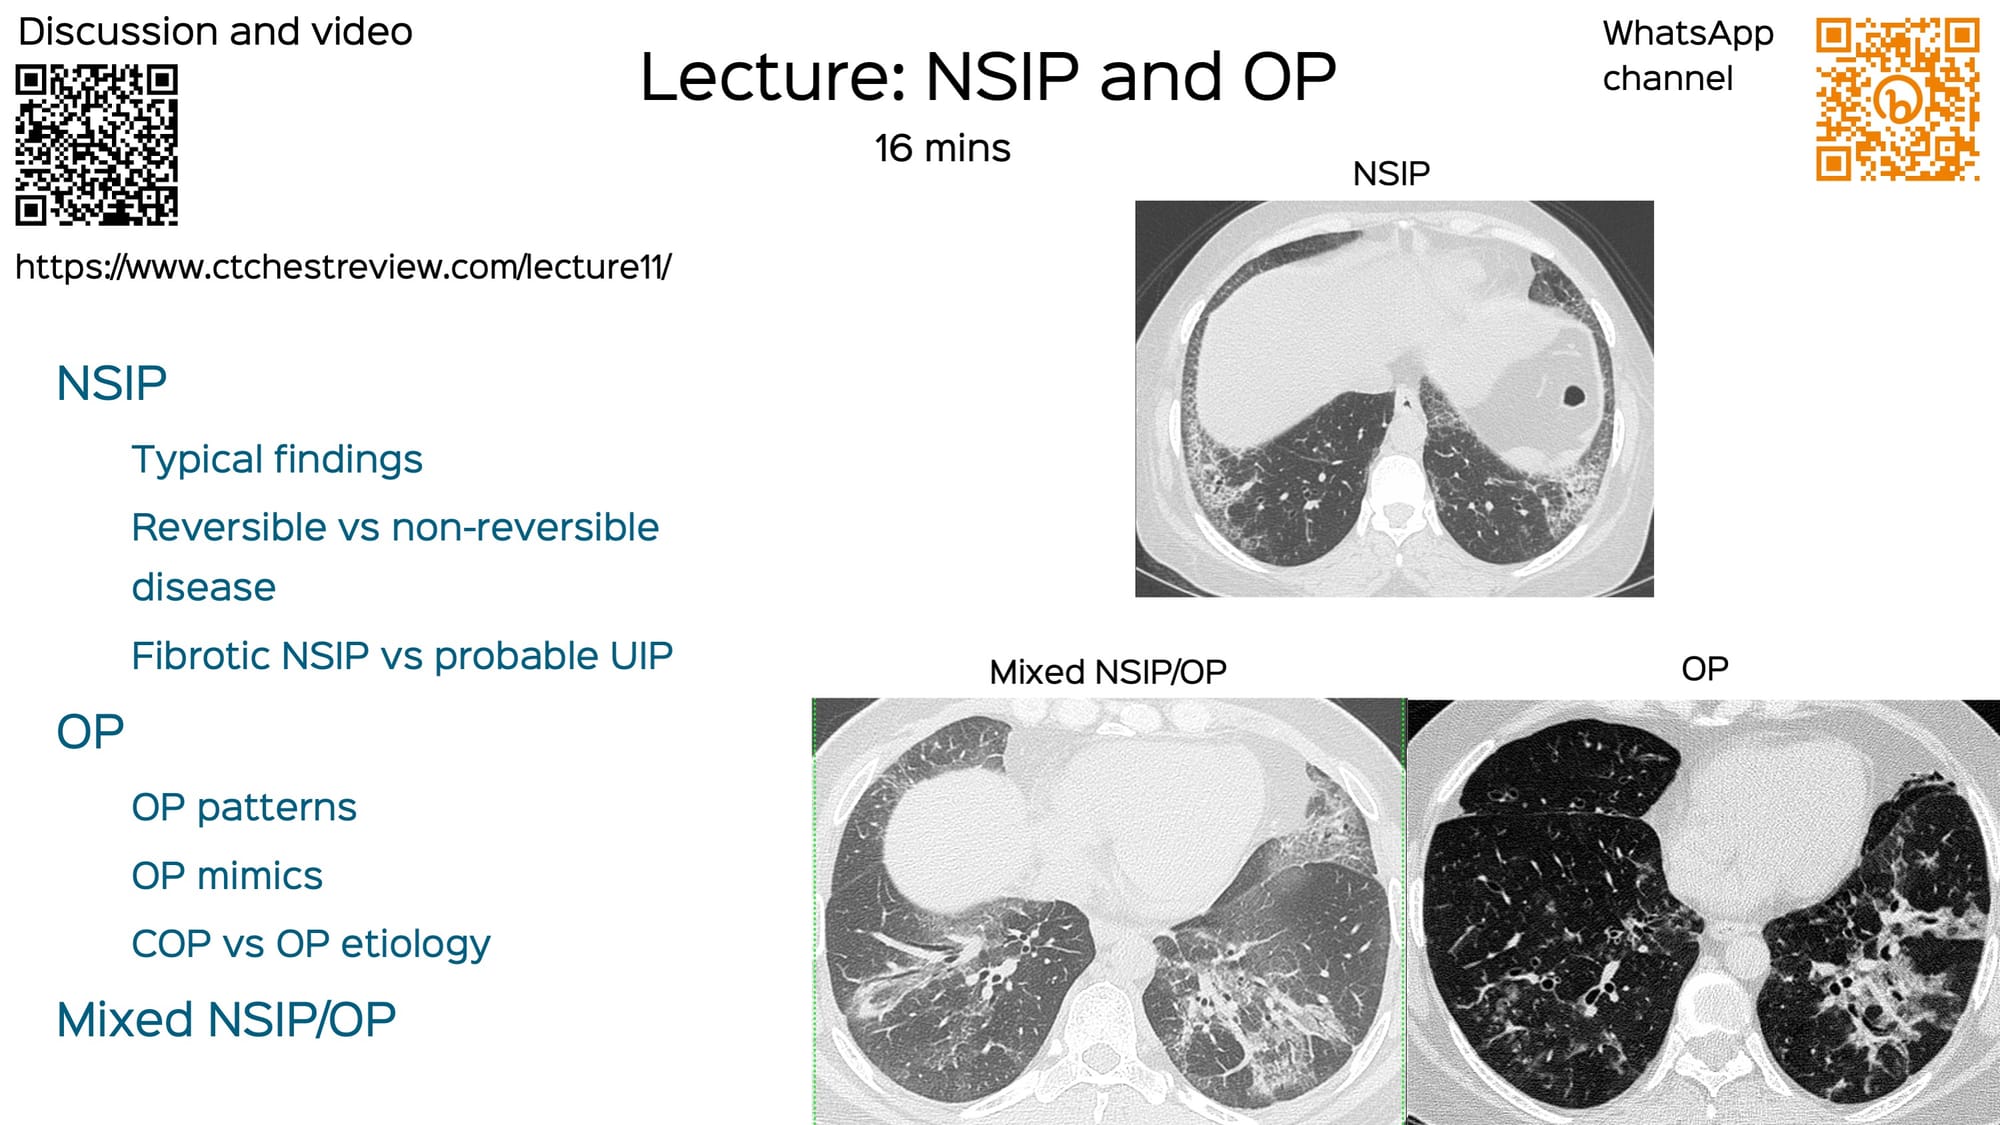 Lecture: NSIP and OP